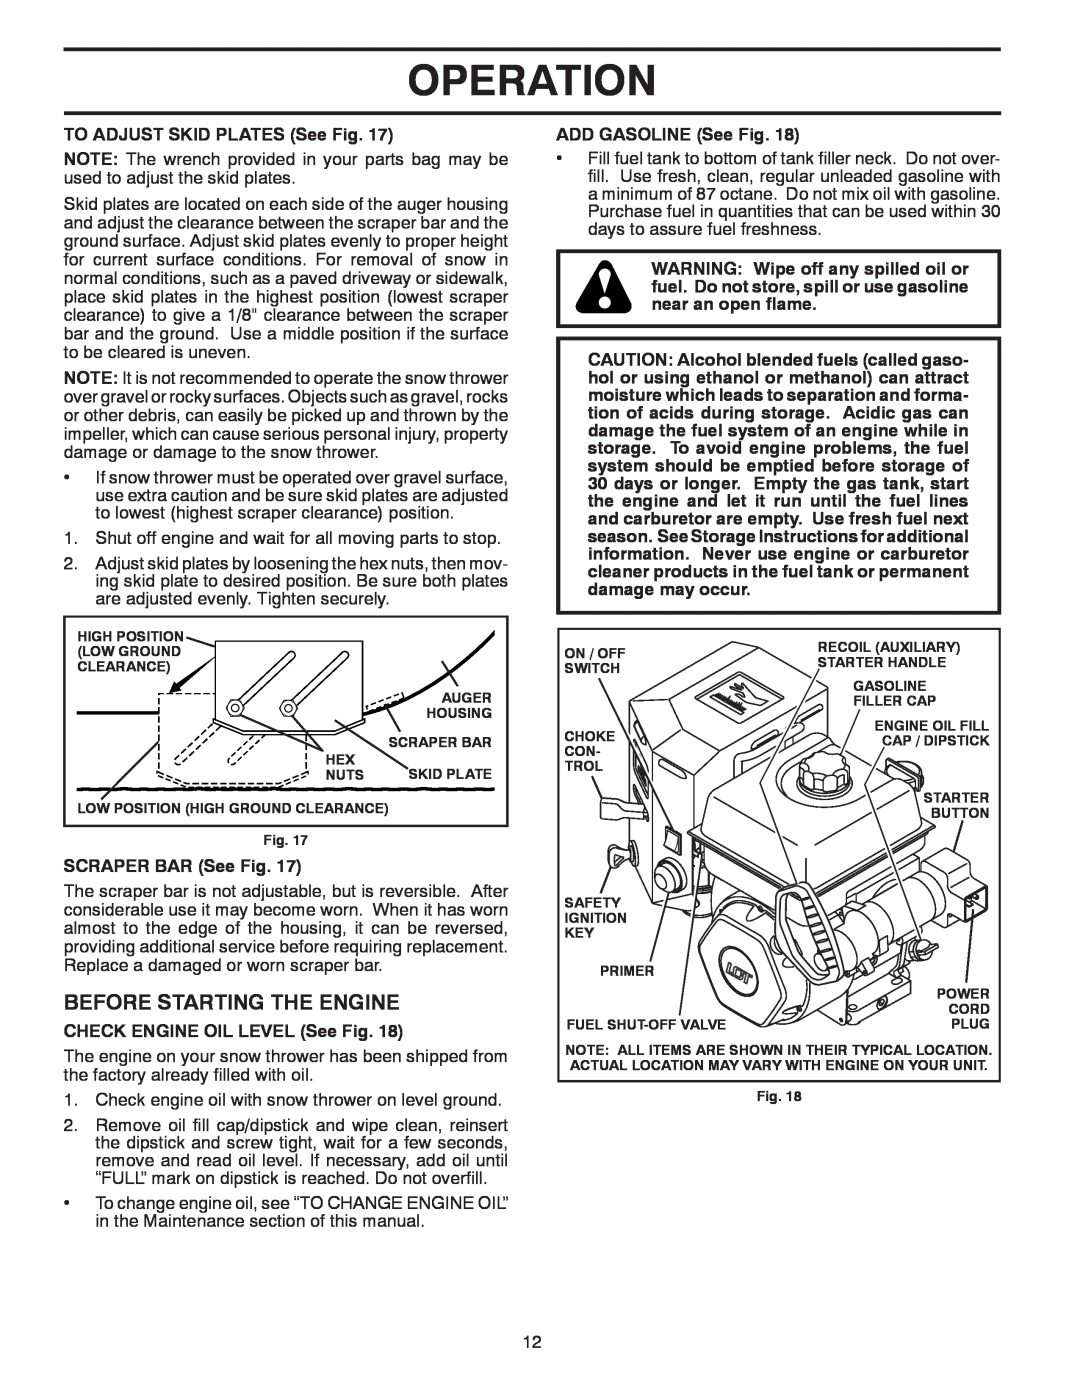 Poulan 435564, 96198003600 Before Starting The Engine, Operation, TO ADJUST SKID PLATES See Fig, SCRAPER BAR See Fig 